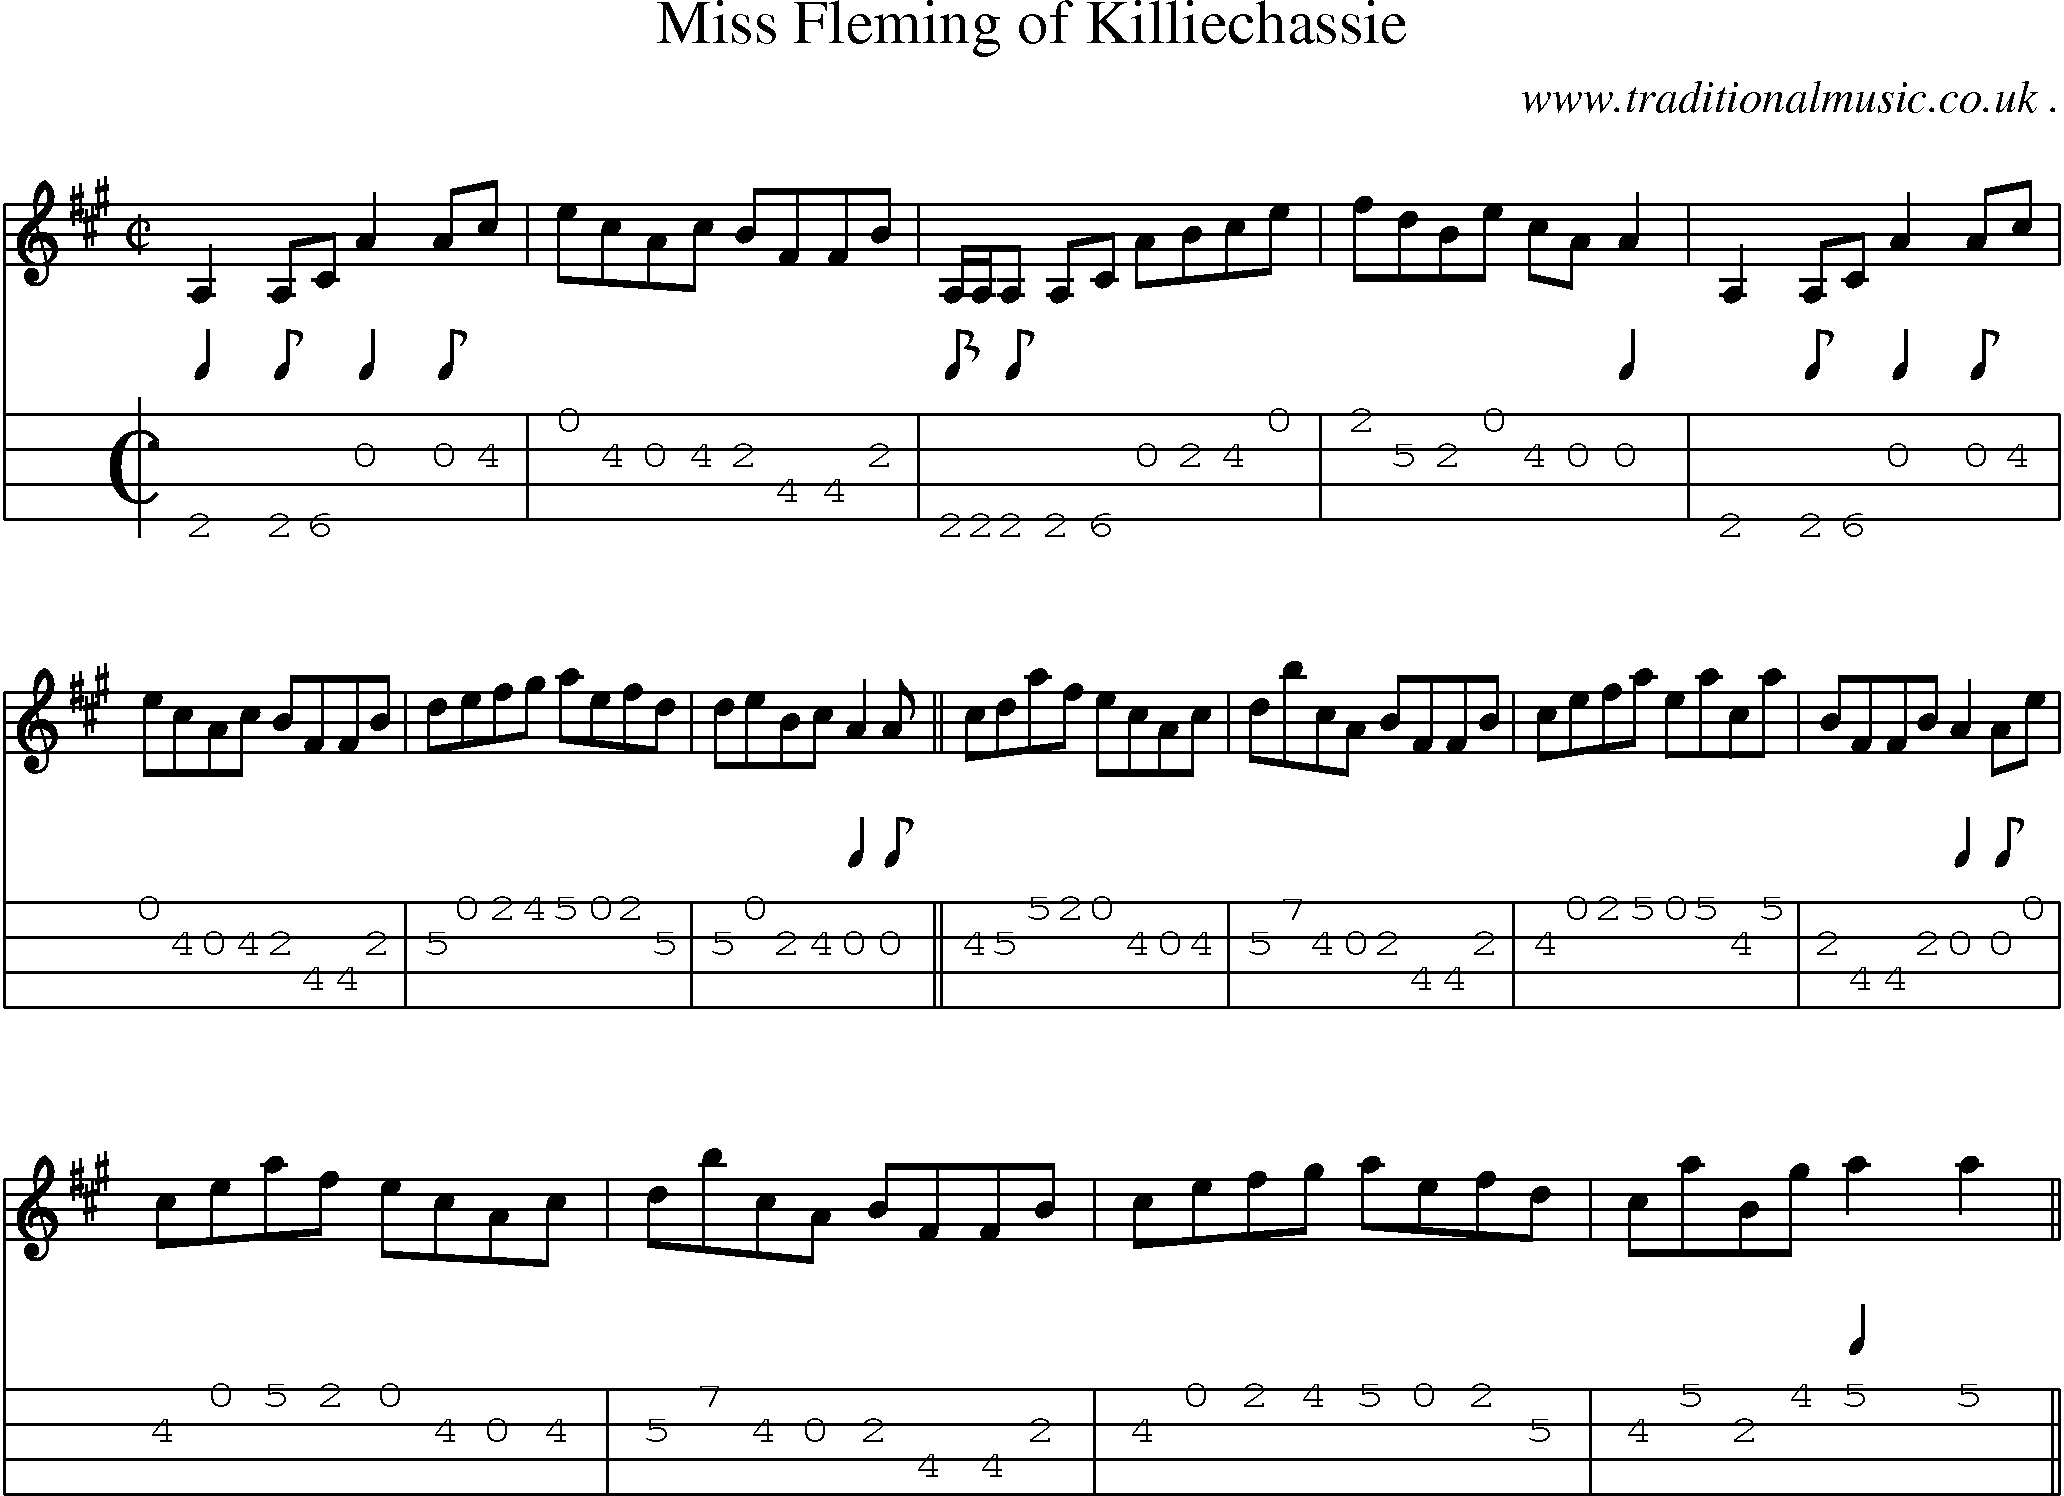 Sheet-music  score, Chords and Mandolin Tabs for Miss Fleming Of Killiechassie